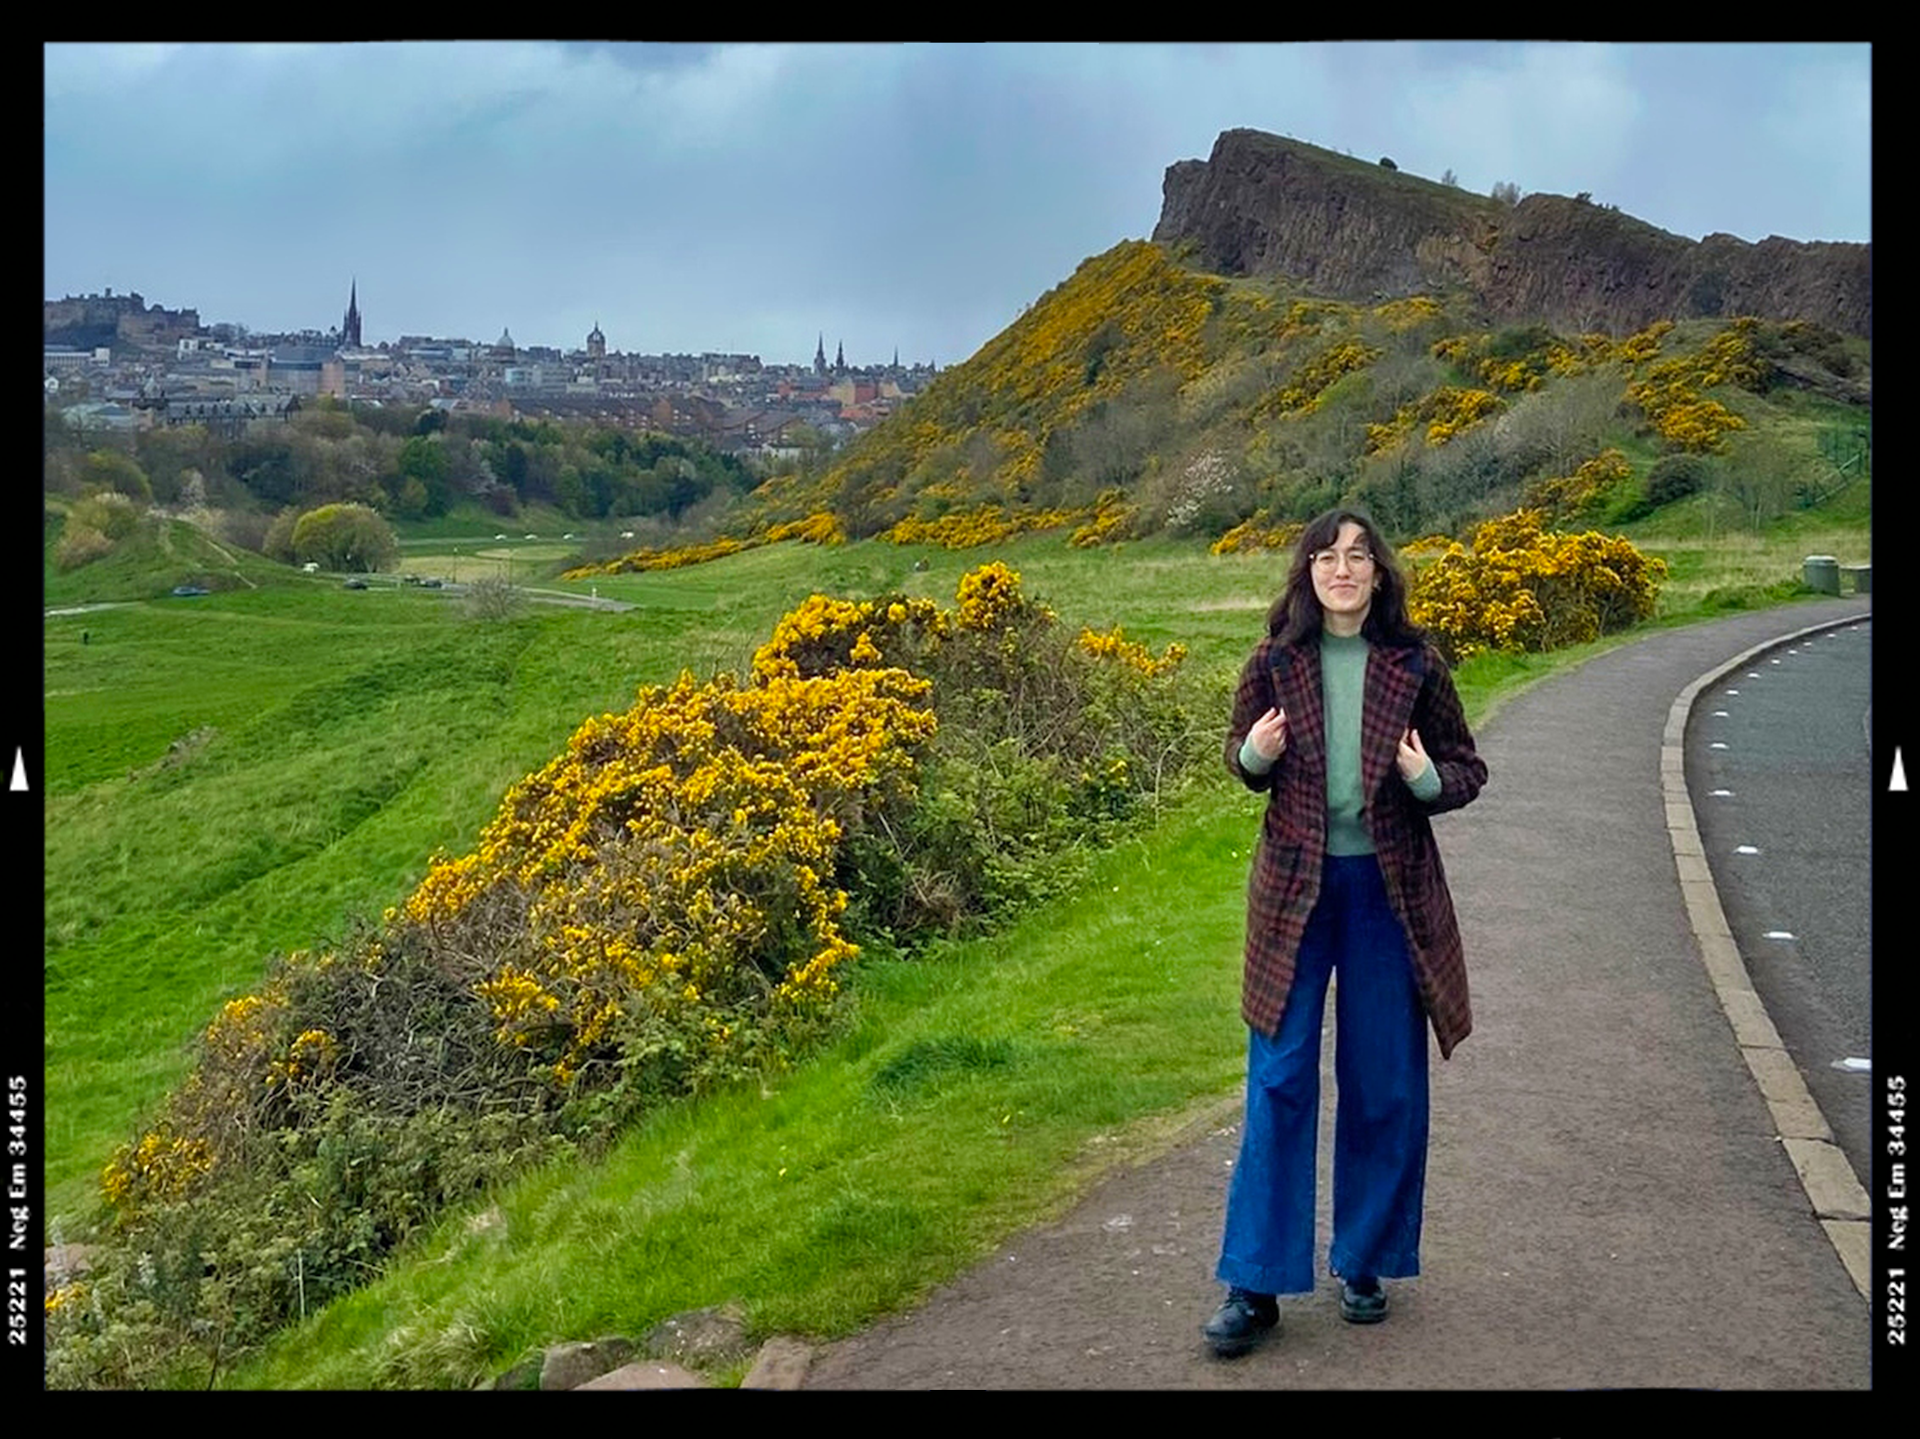 Woman walking in Scotland with Arthur's Seat in background